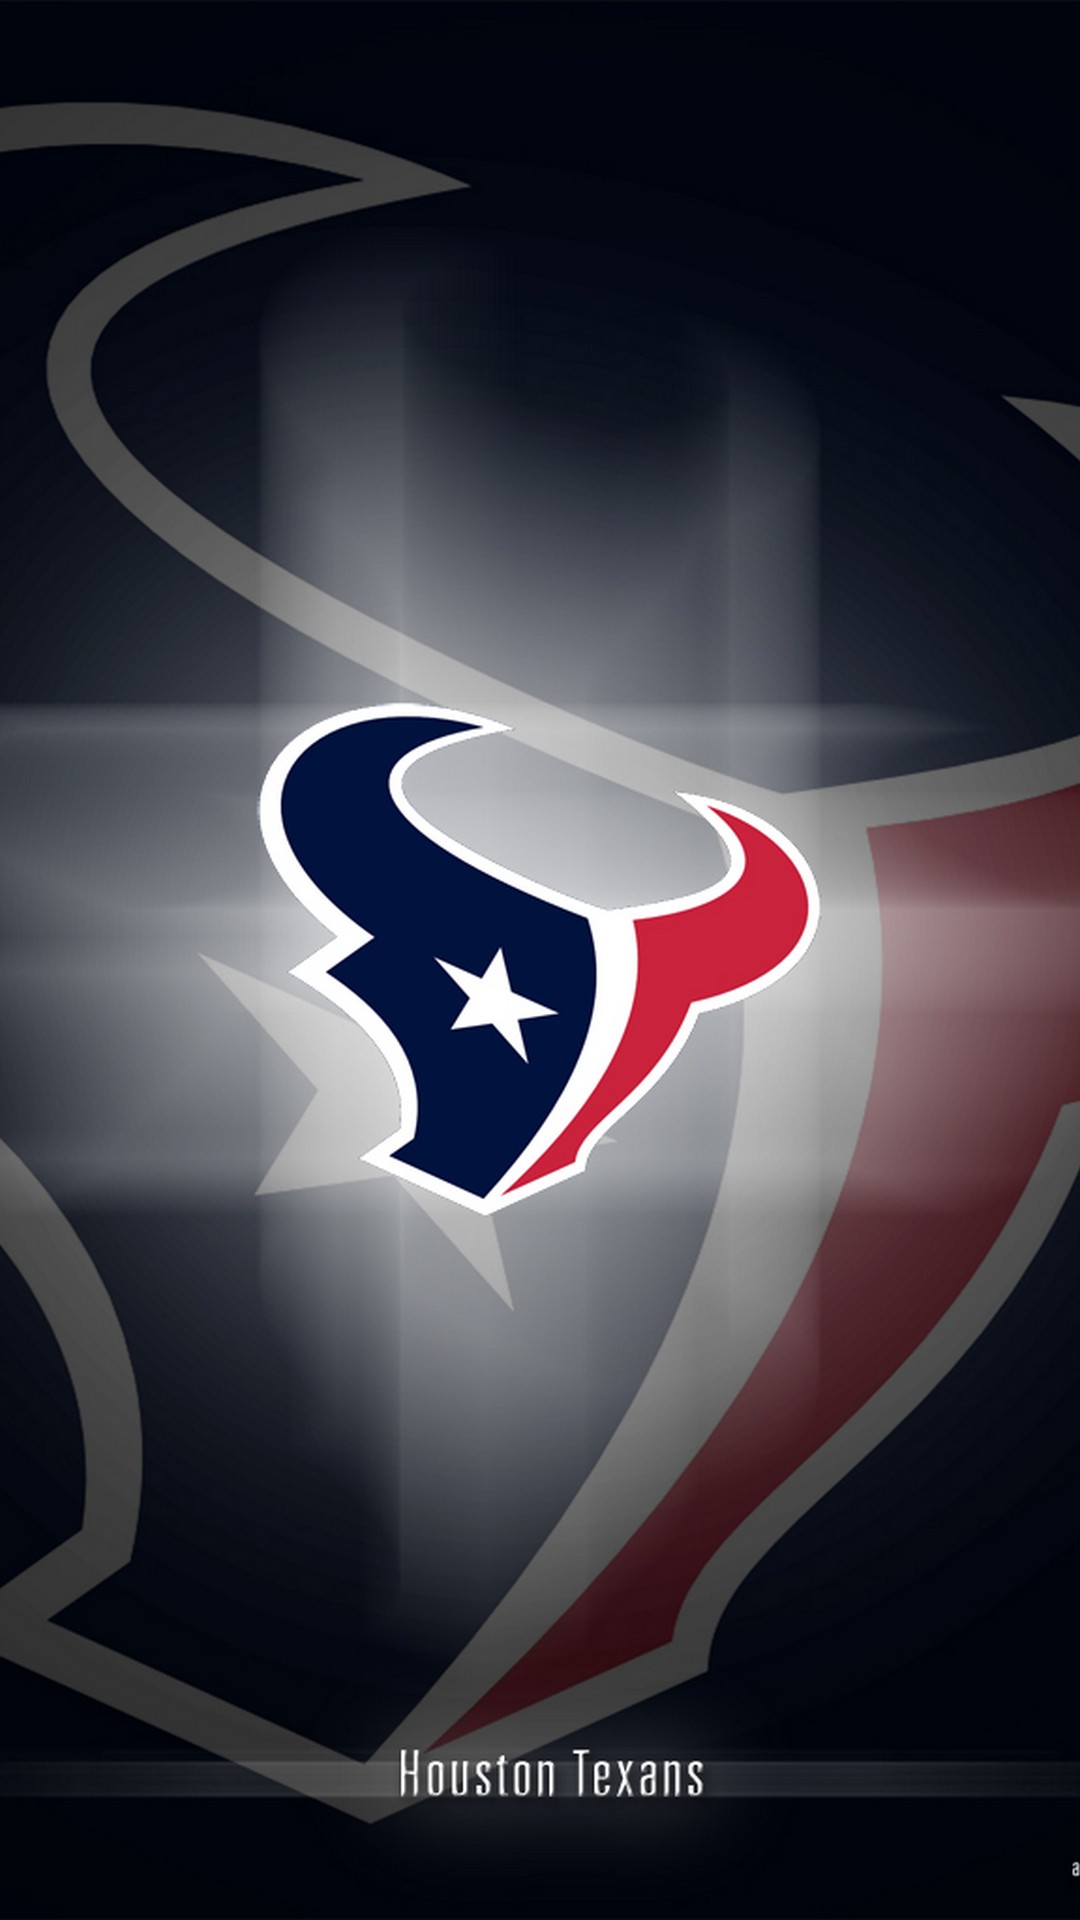 Houston Texans iPhone 8 Plus Wallpaper With high-resolution 1080X1920 pixel. Download and set as wallpaper for Apple iPhone X, XS Max, XR, 8, 7, 6, SE, iPad, Android